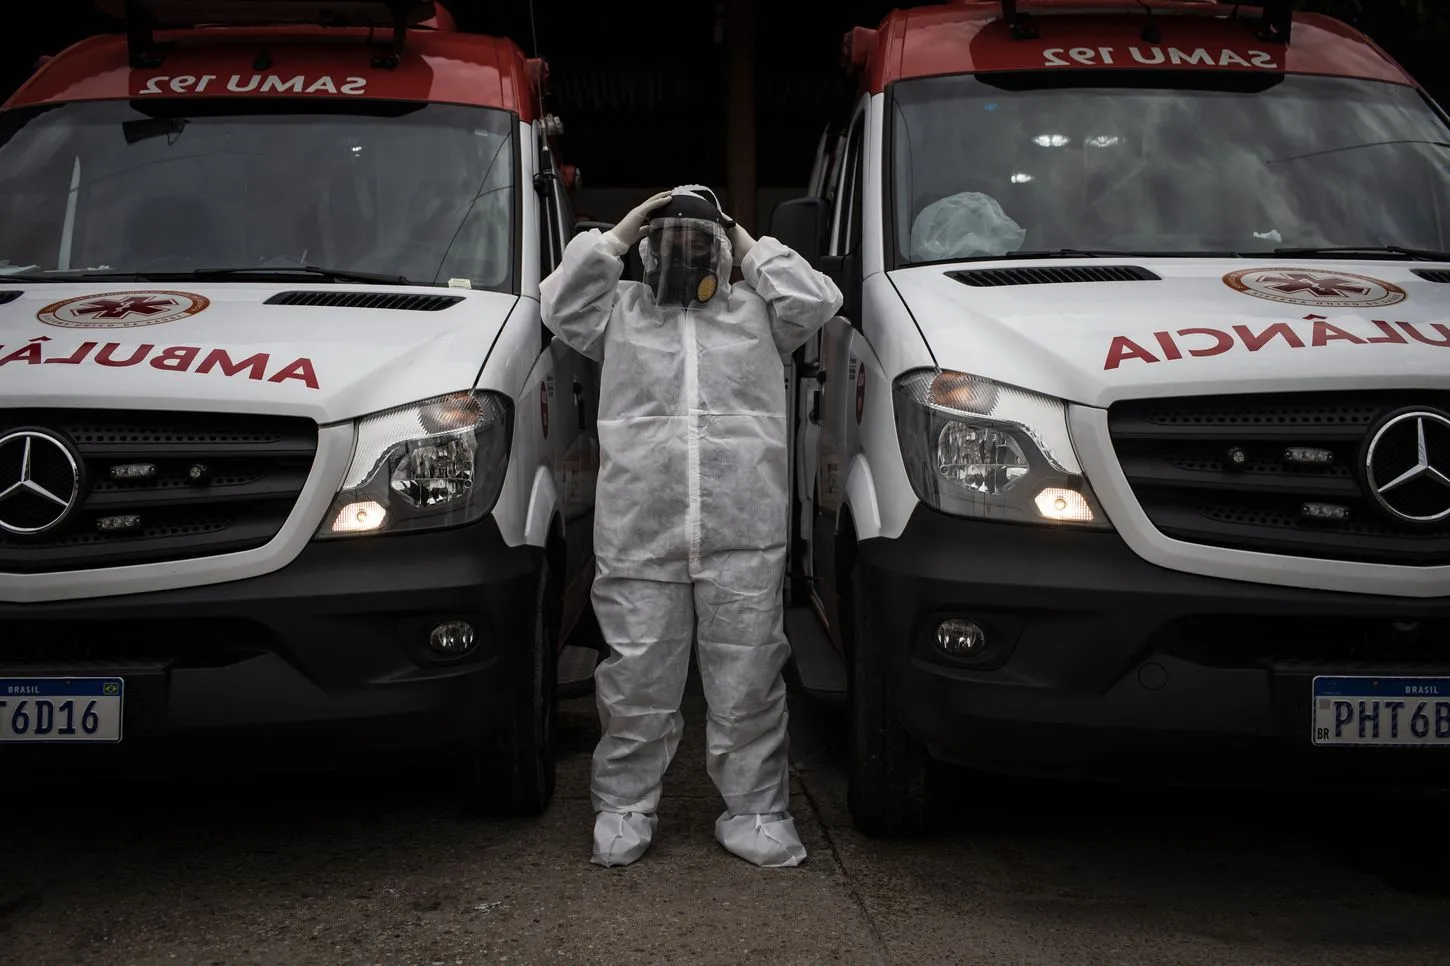 Emergency physician Alessandra Said dons personal protective equipment in preparation to attend to a patient with covid-19. (Raphael Alves for The Washington Post)